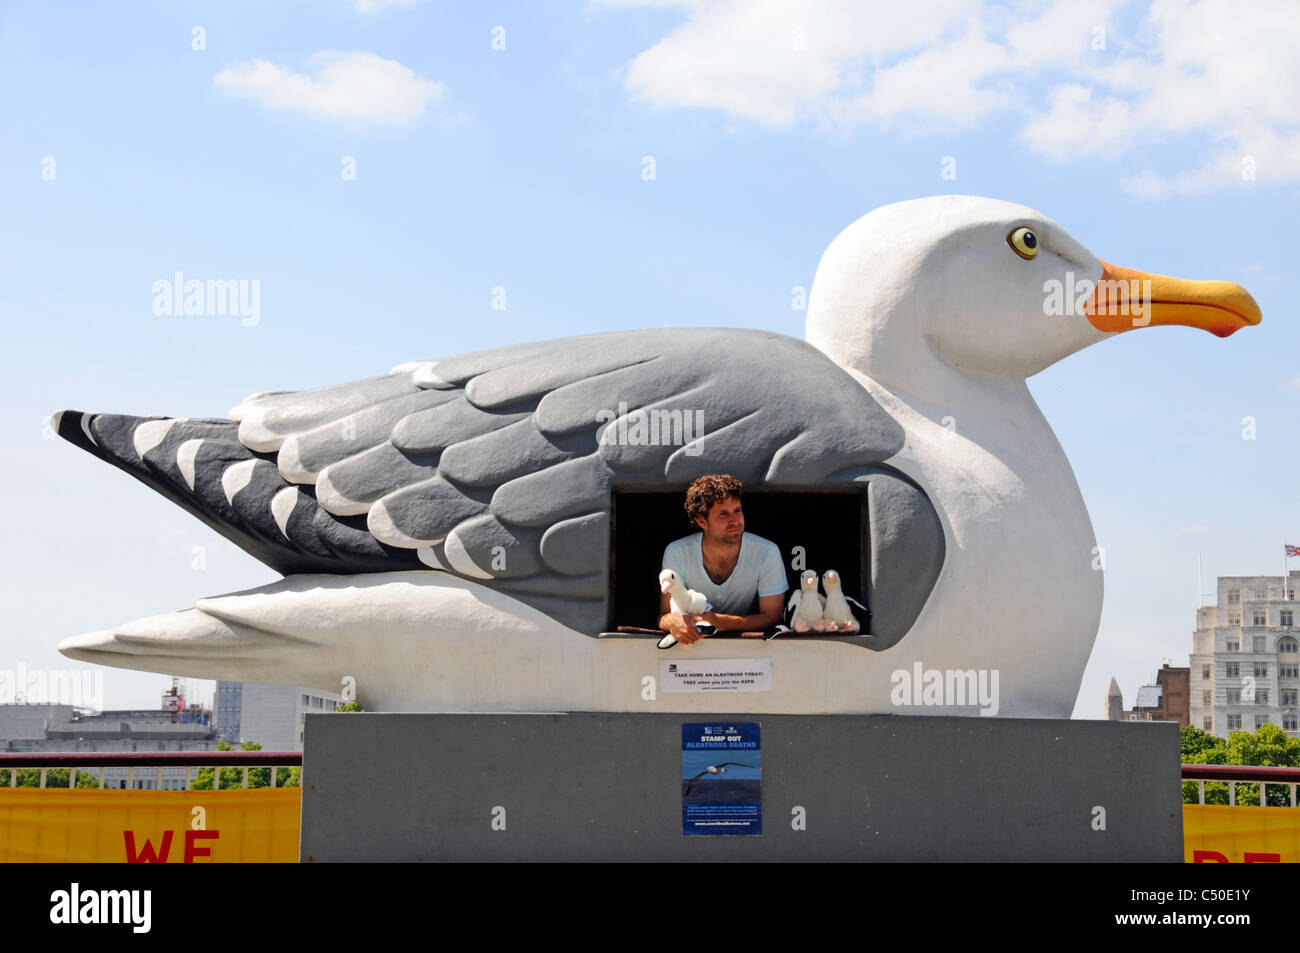 Large seabird shaped cabin used by man selling membership of RSPB charit & giving away toy Albatross to new members Southbank centre Lambeth London UK Stock Photo